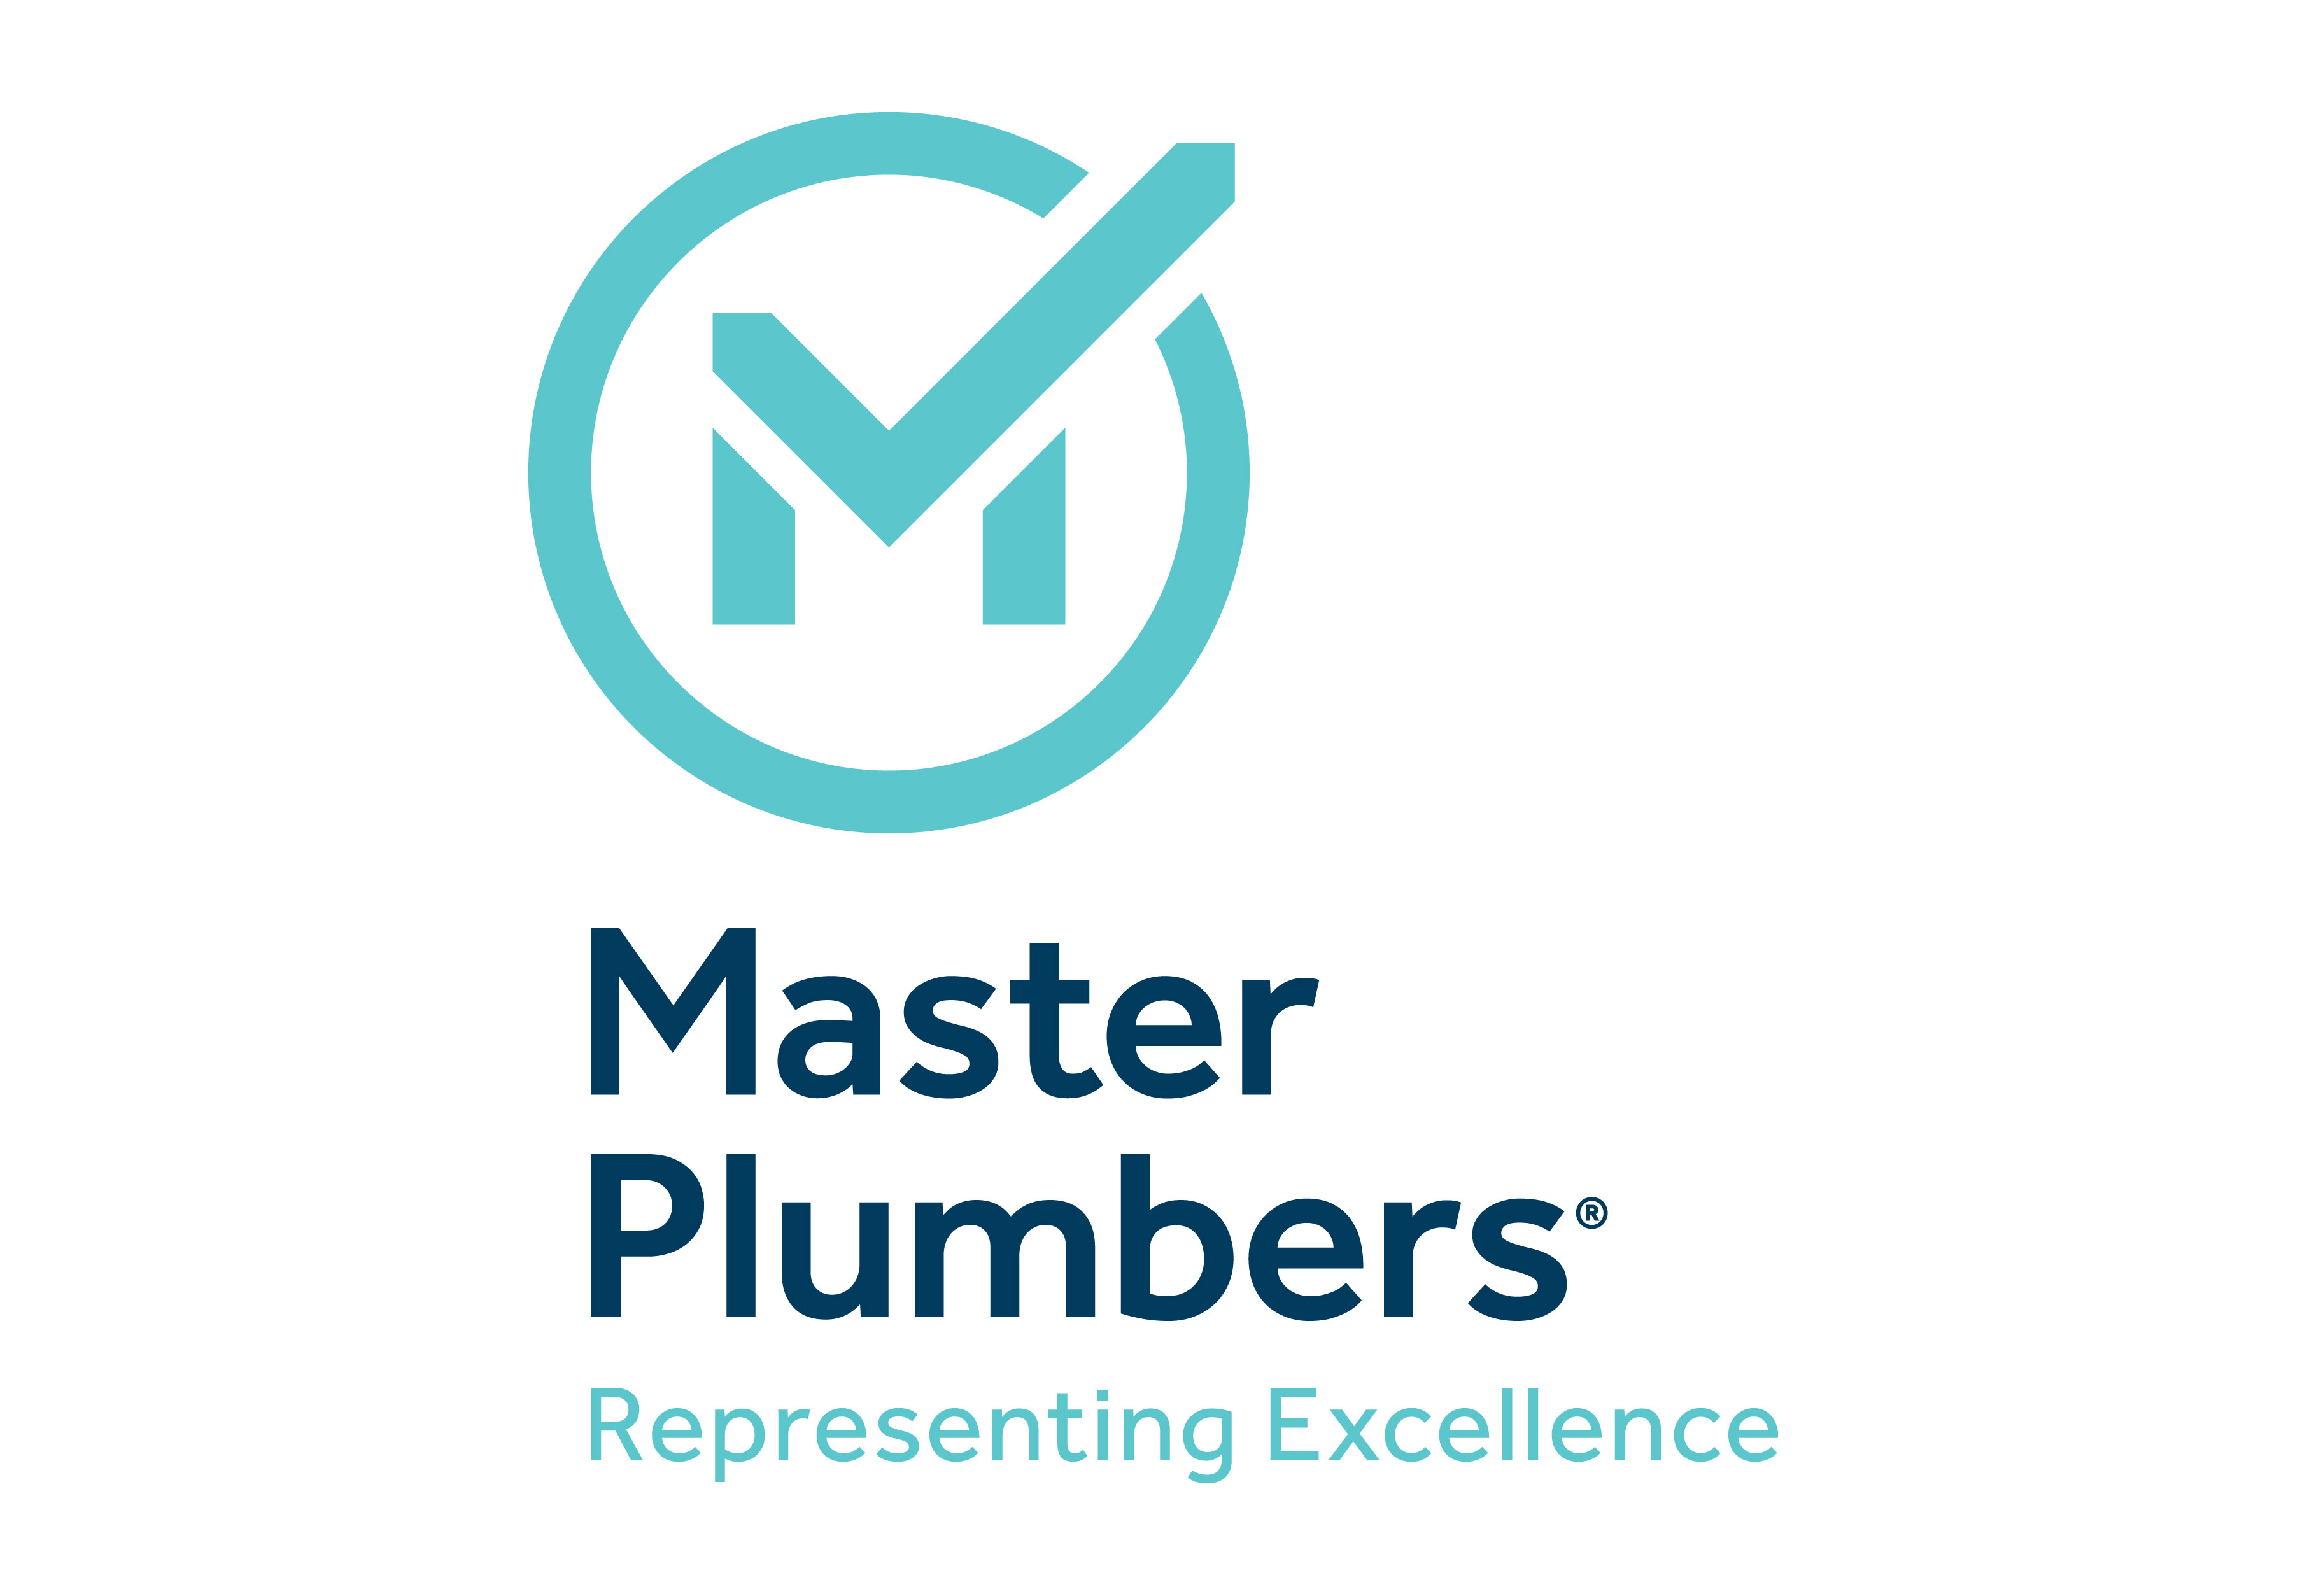 Member of the Master Plumbers Association! name